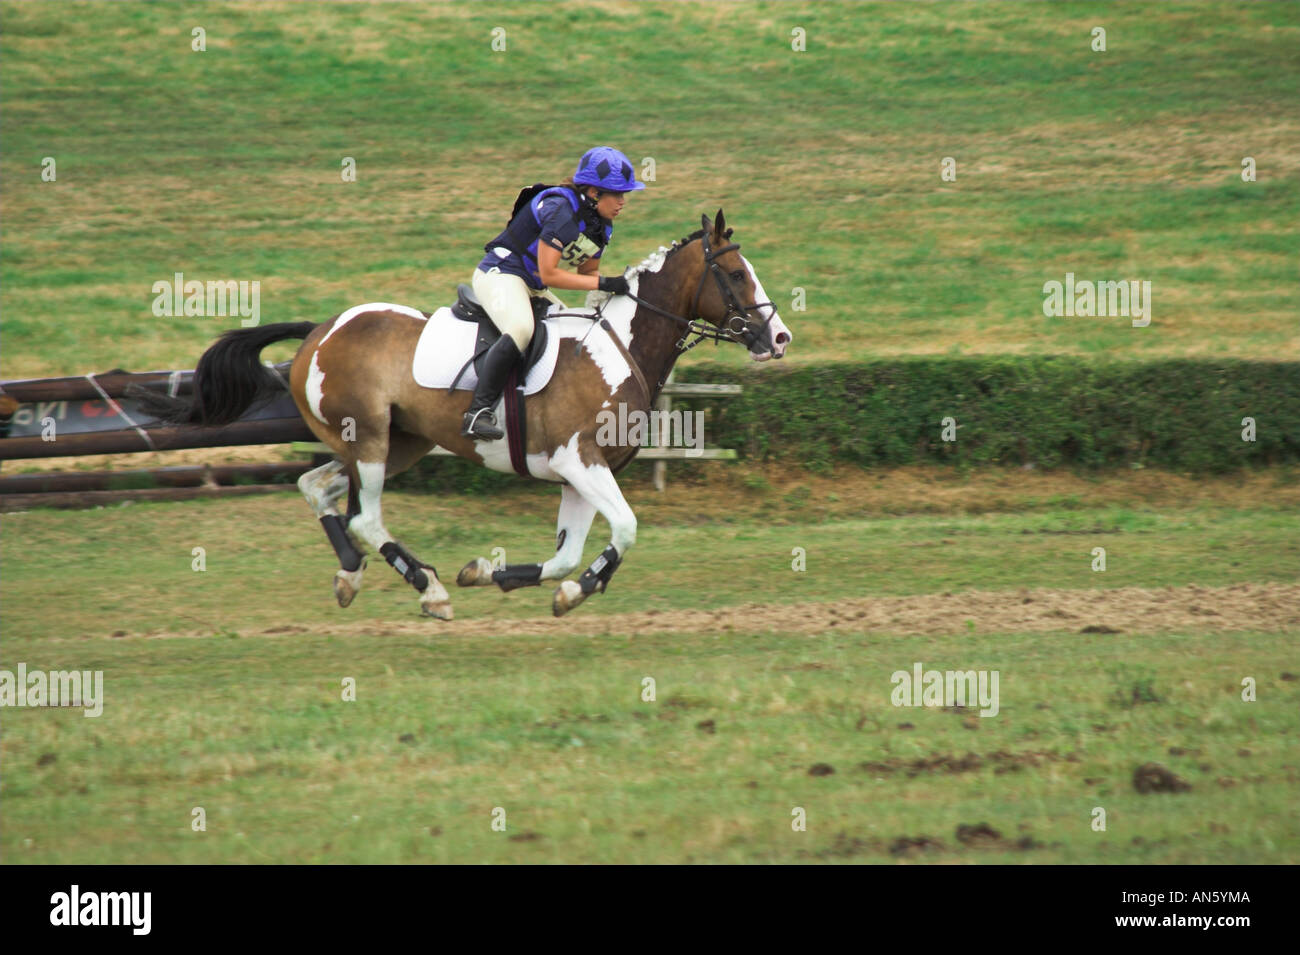 Three Day Event Rider competing at the Tetton ParkHorse Trials Stock Photo